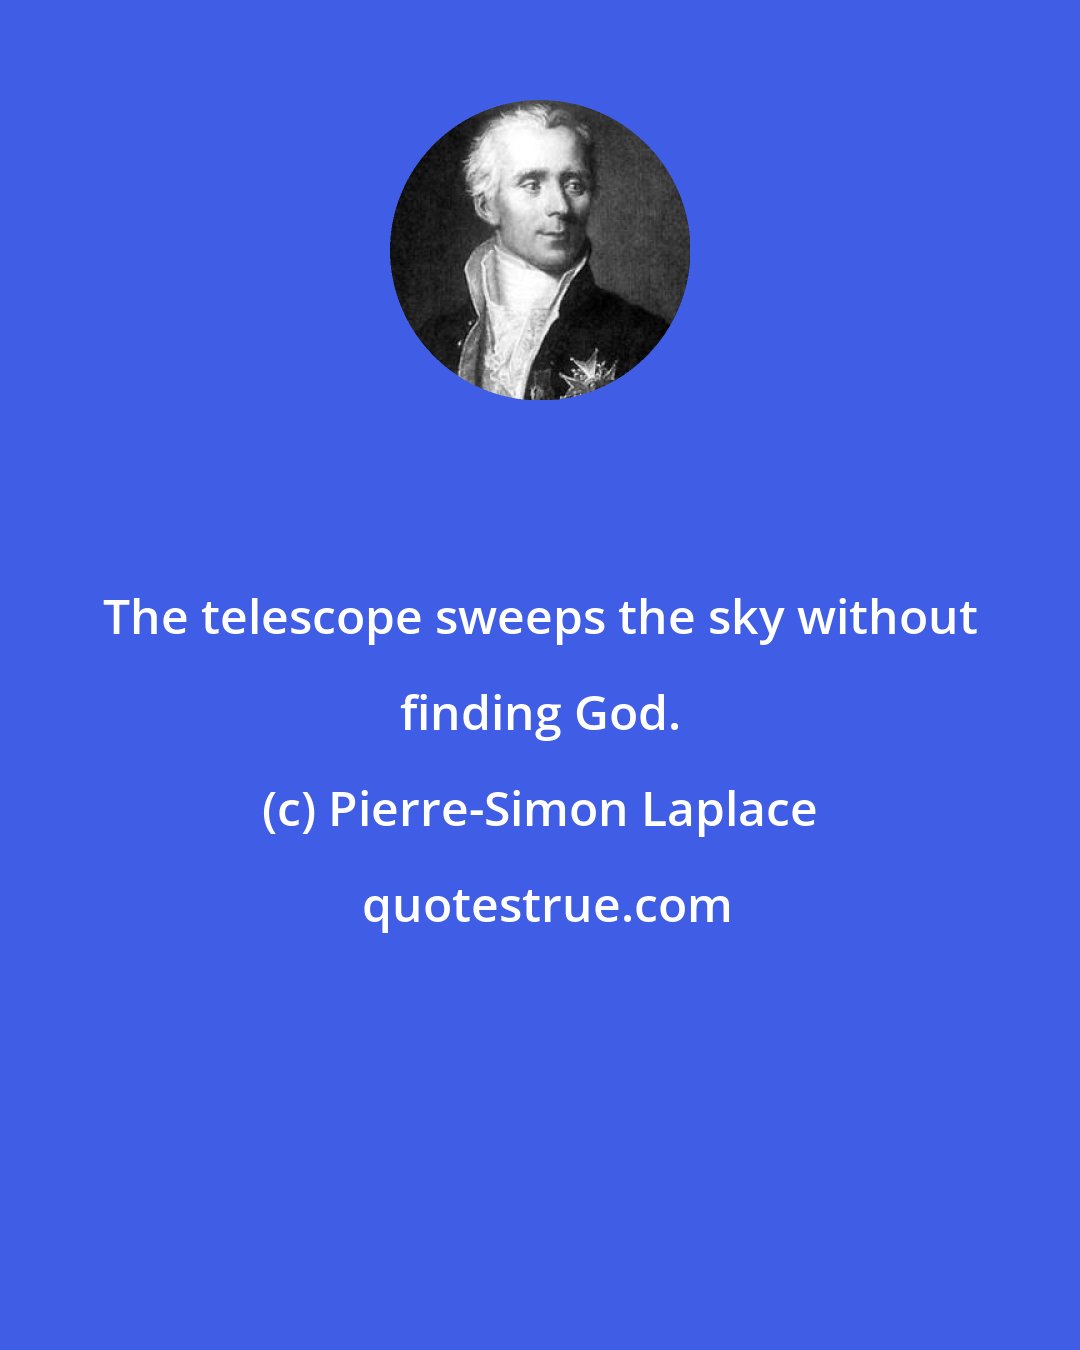 Pierre-Simon Laplace: The telescope sweeps the sky without finding God.